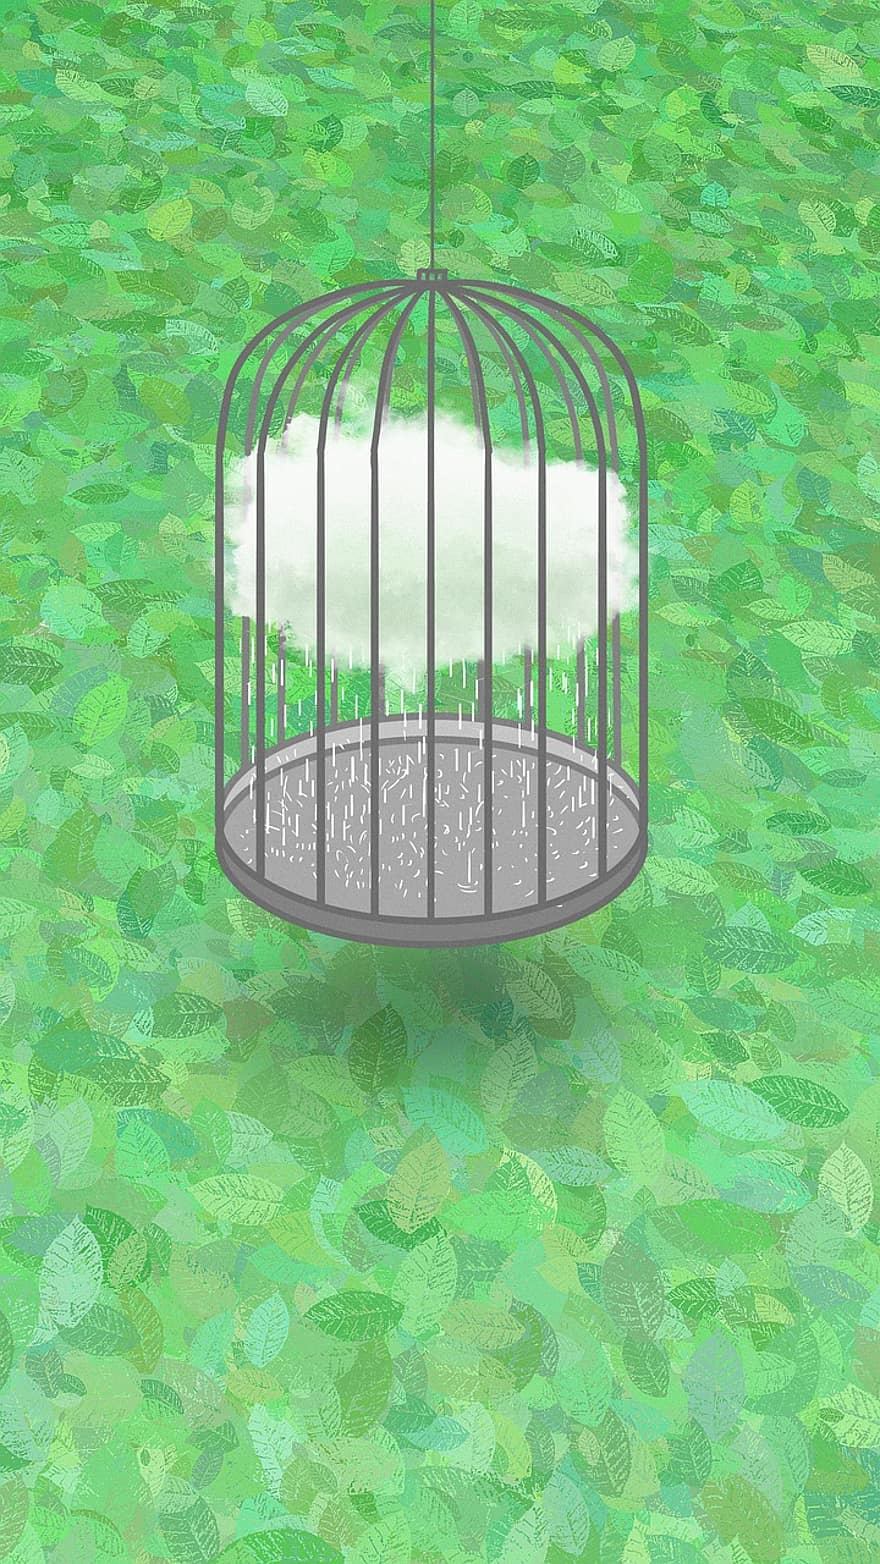 Painting, Creativity, Landscape, Clouds, Cage, Birdcage, Closure, Imprisonment, dom, Green Clouds, Green Painting